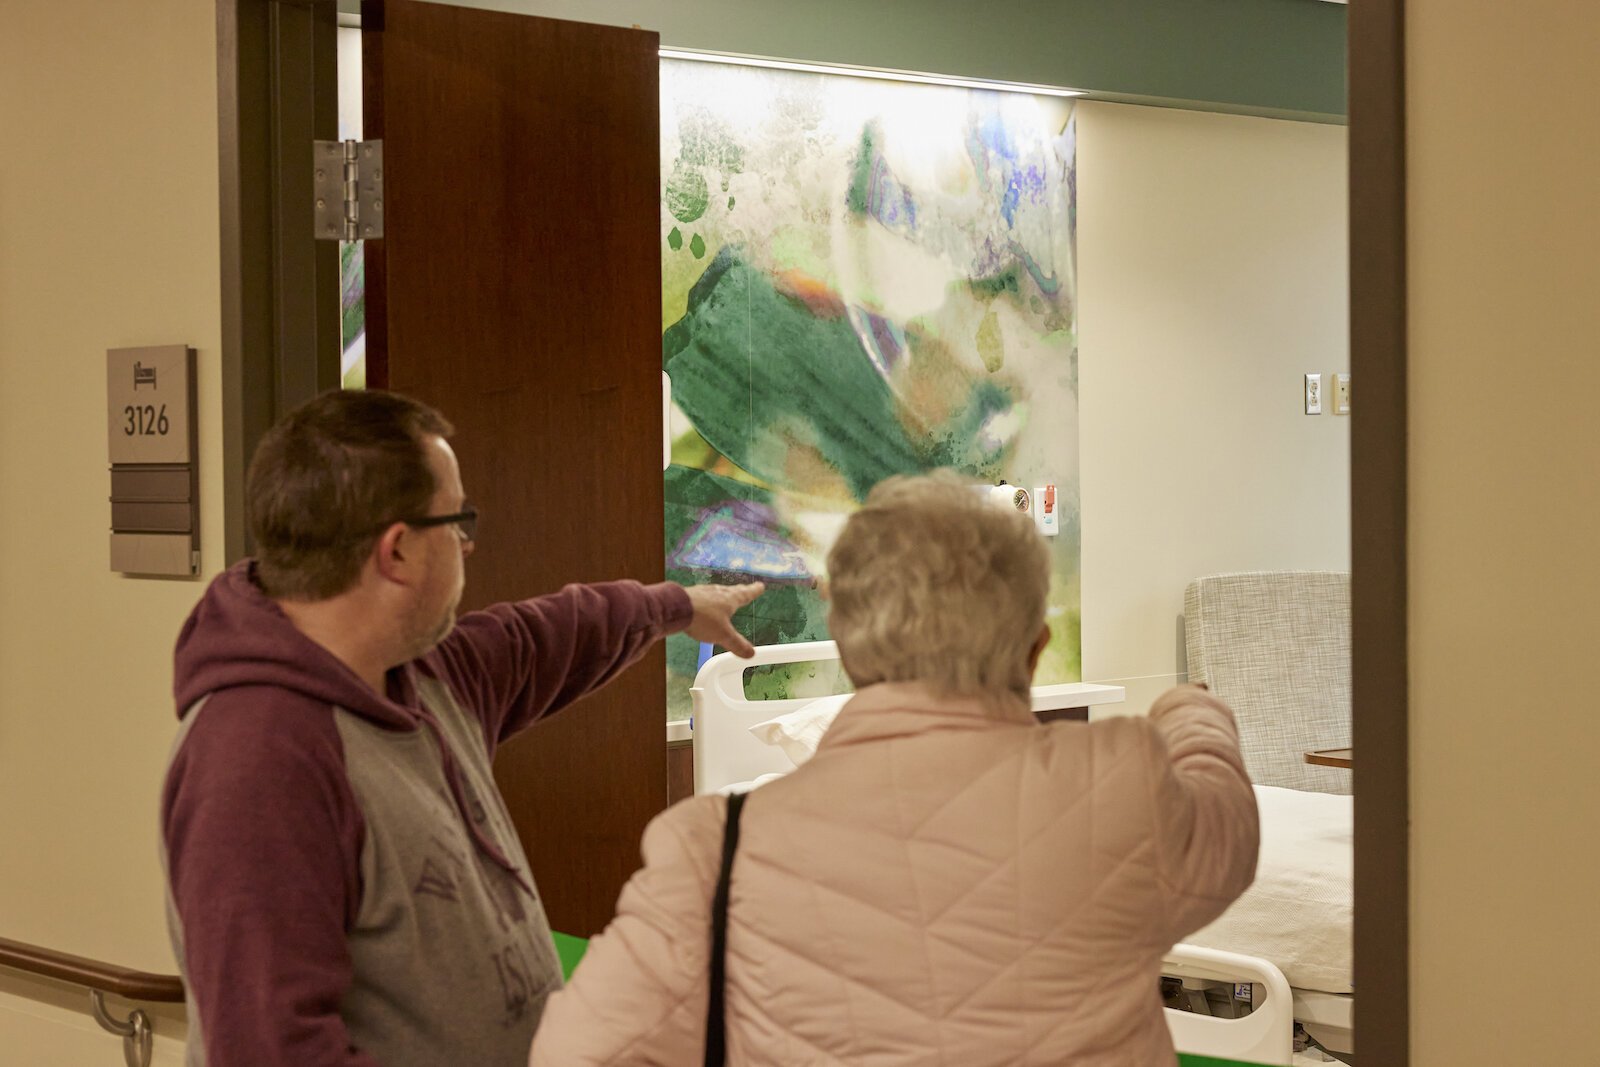 Open house guests view a patient room in the new Parkview Kosciusko Hospital, which includes a mural painted by a local artist.